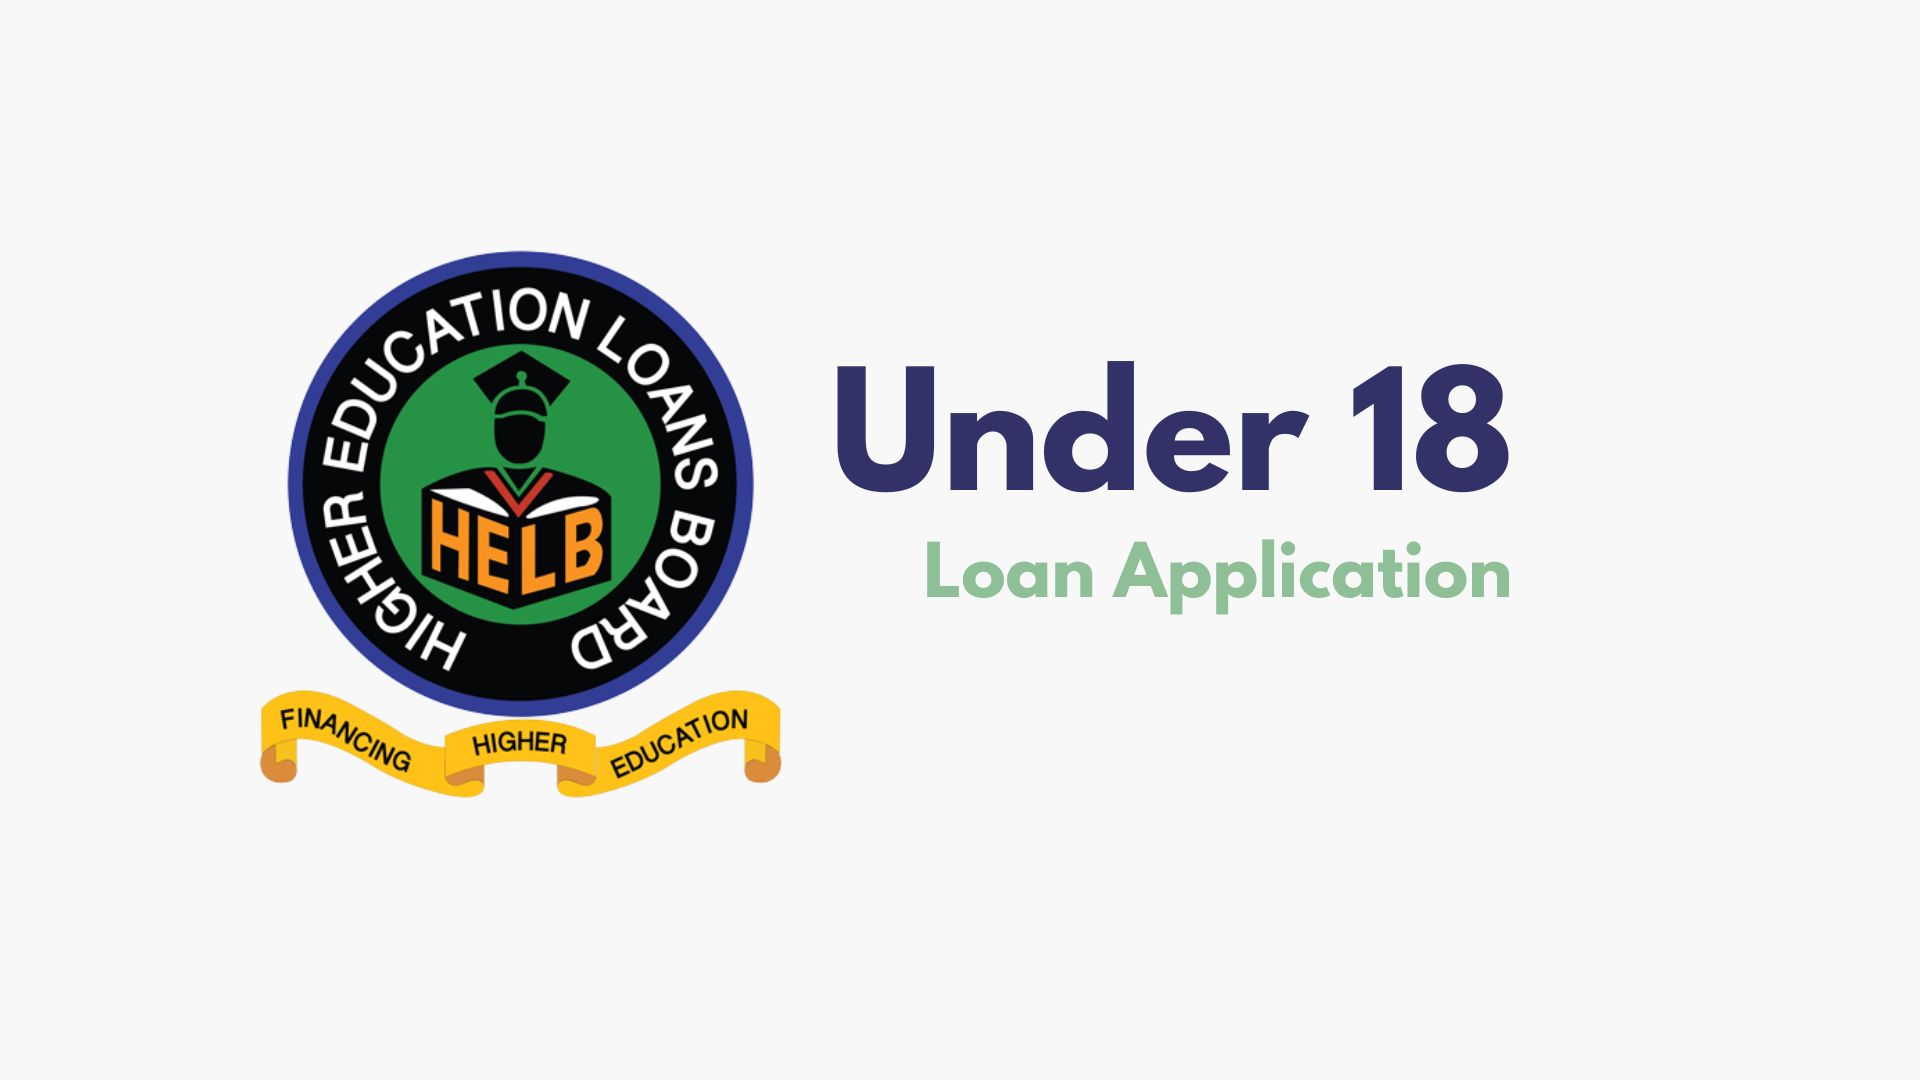 Helb to allow students under 18 years to apply for loans